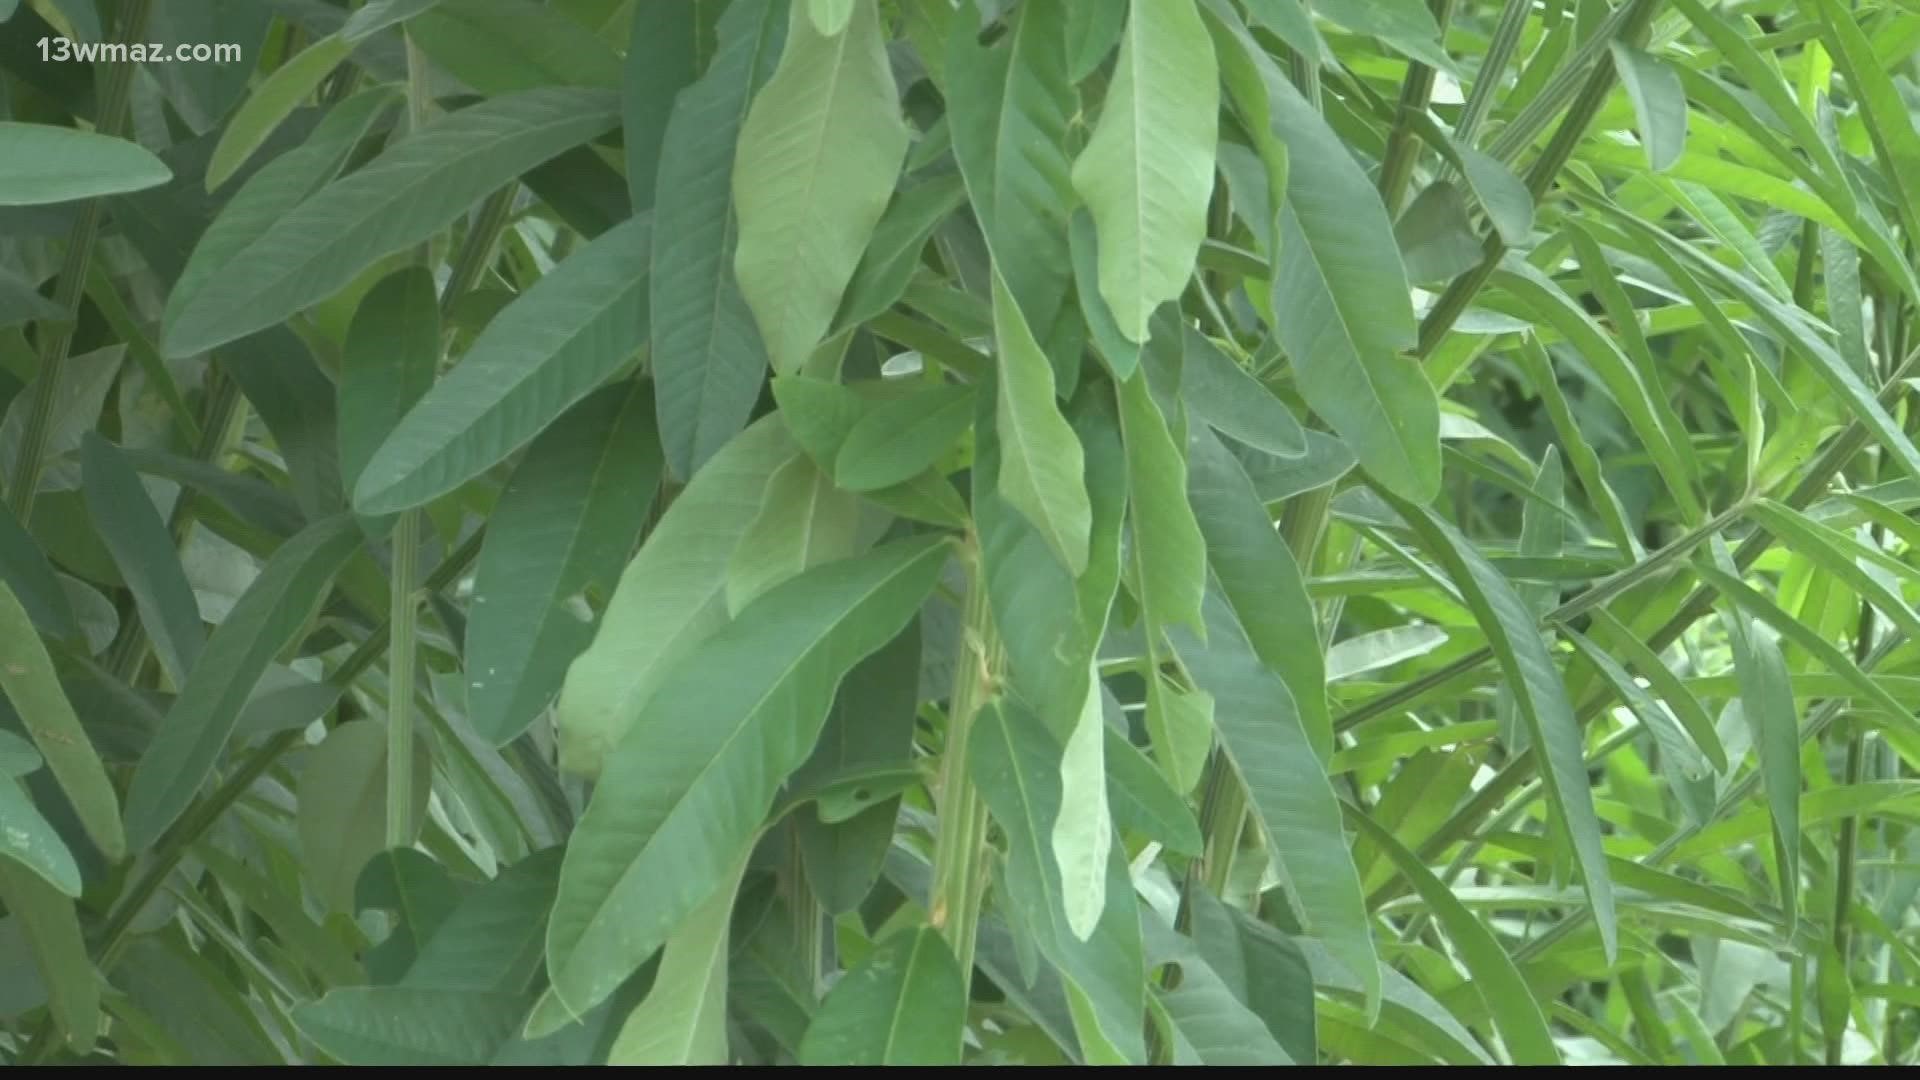 A Georgia DNR biologist says the tall plant will provide shade and camouflage the hunters as they take aim